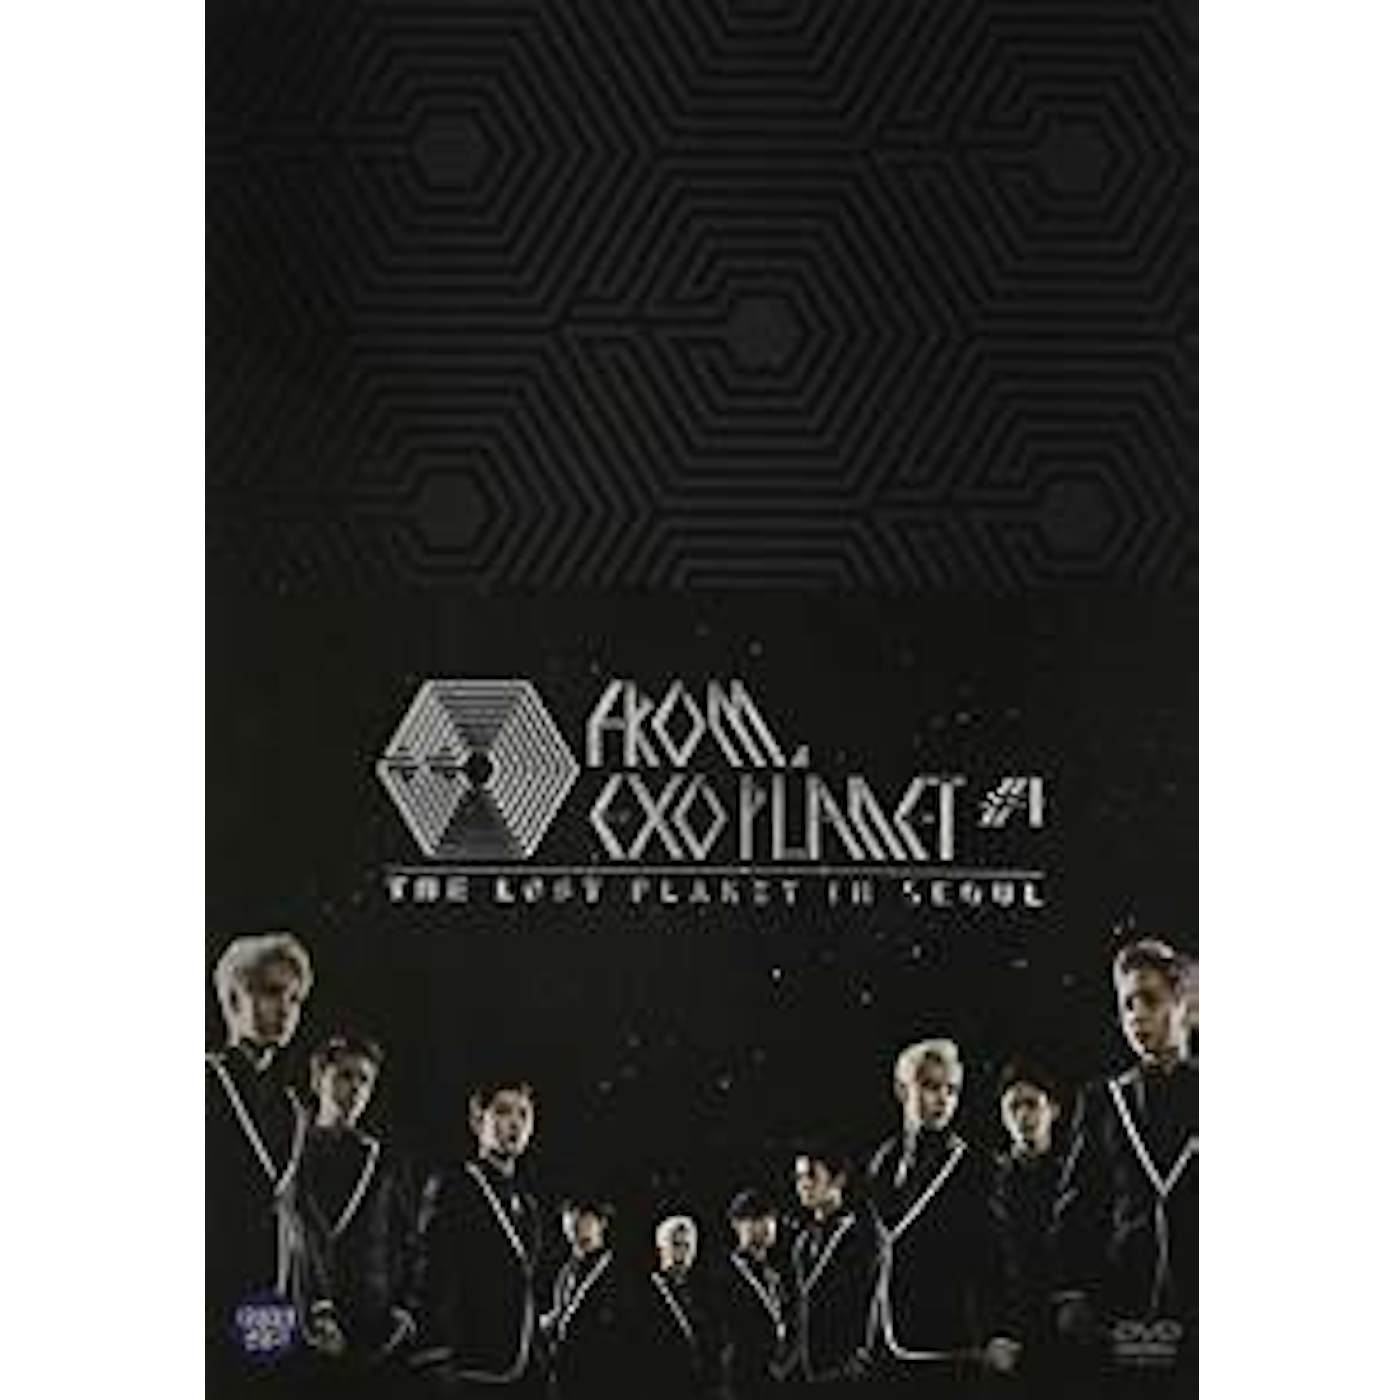 EXO FROM. EXOPLANET NO.1-THE LOST PLANET DVD